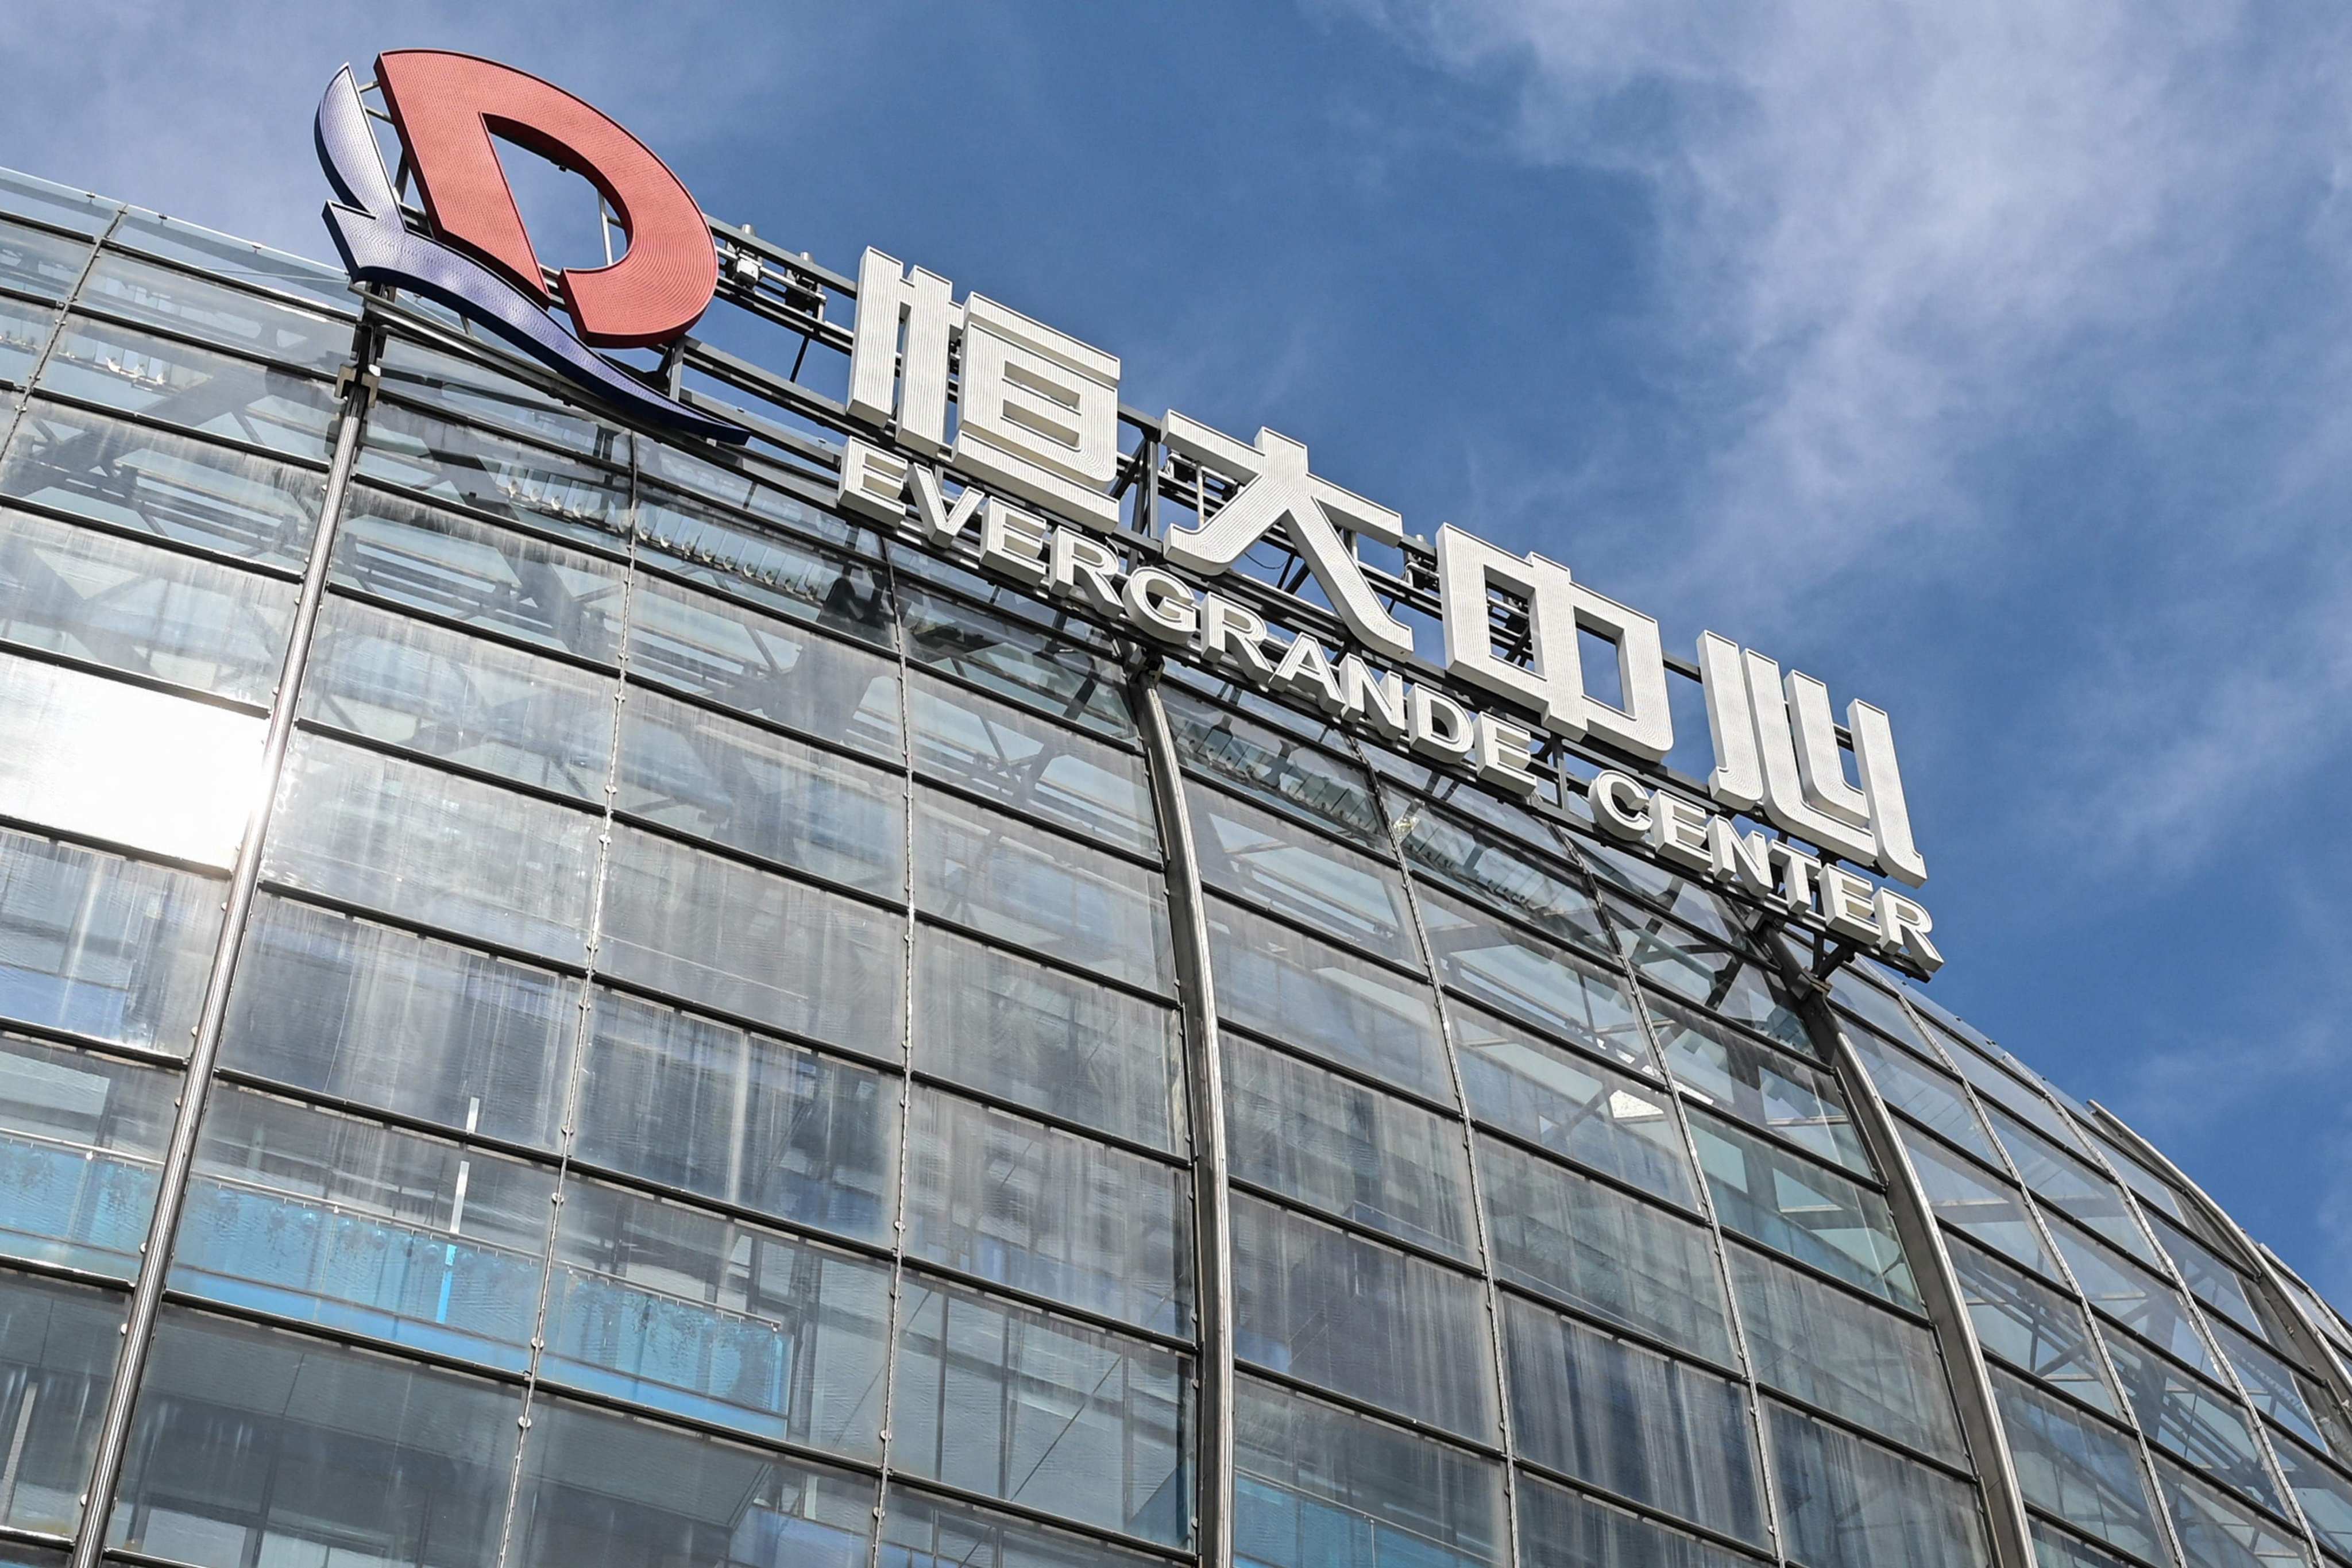 Evergrande’s financial subsidiary made headlines in 2021 after it was revealed that half a dozen of its employees redeemed wealth management products ahead of their scheduled dates. Photo: AFP